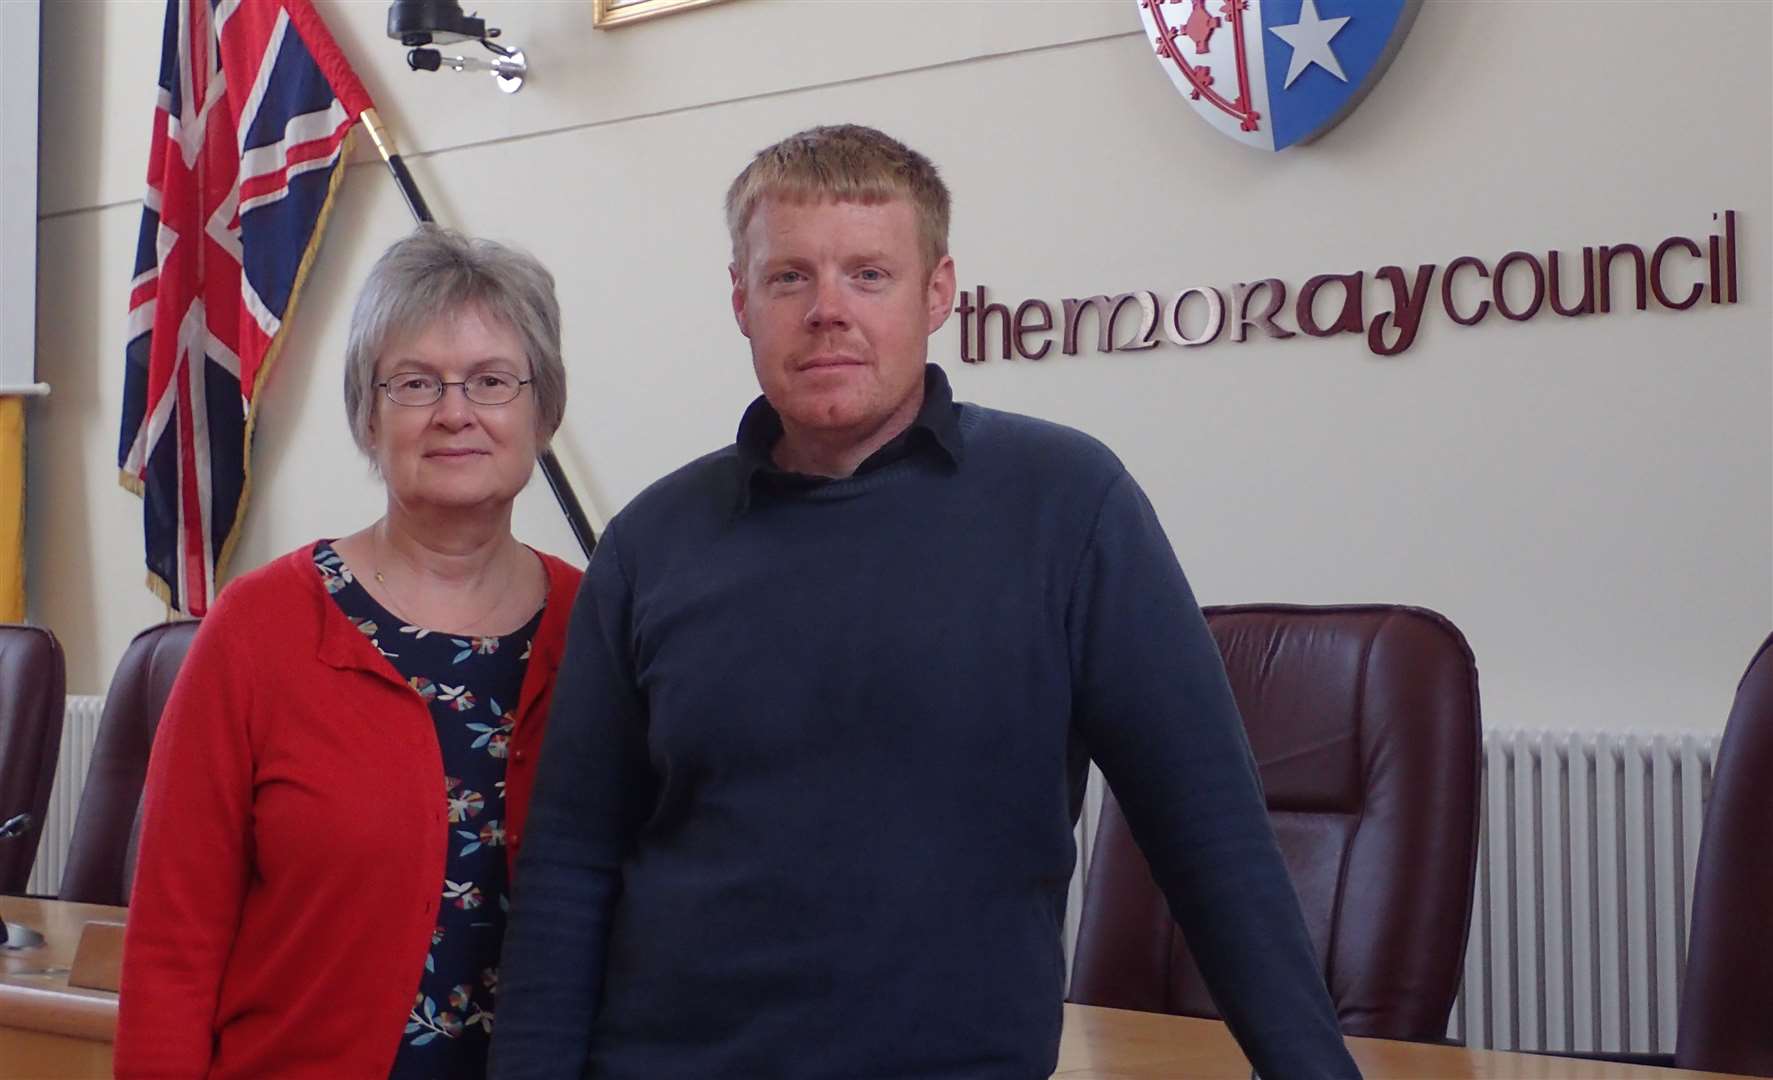 Councillors Claire Feaver and Tim Eagle.